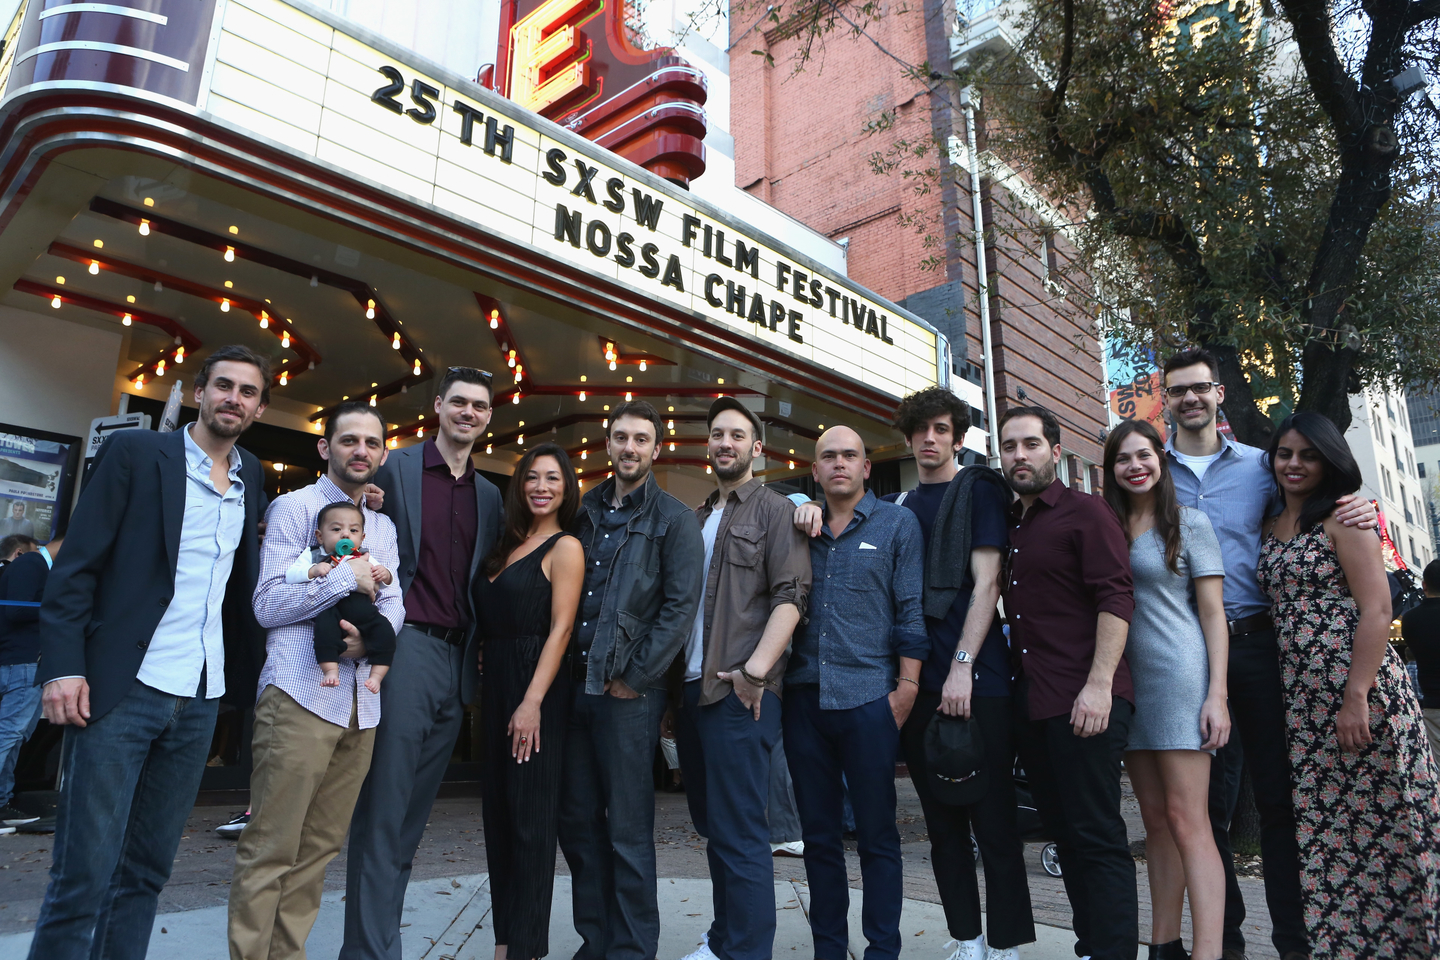 Filmmakers Jeff Zimbalist, Michael Zimbalist, and Julian Duque with guests at the Nossa Chape World Premiere. Photo by Travis P Ball/Getty Images for SXSW